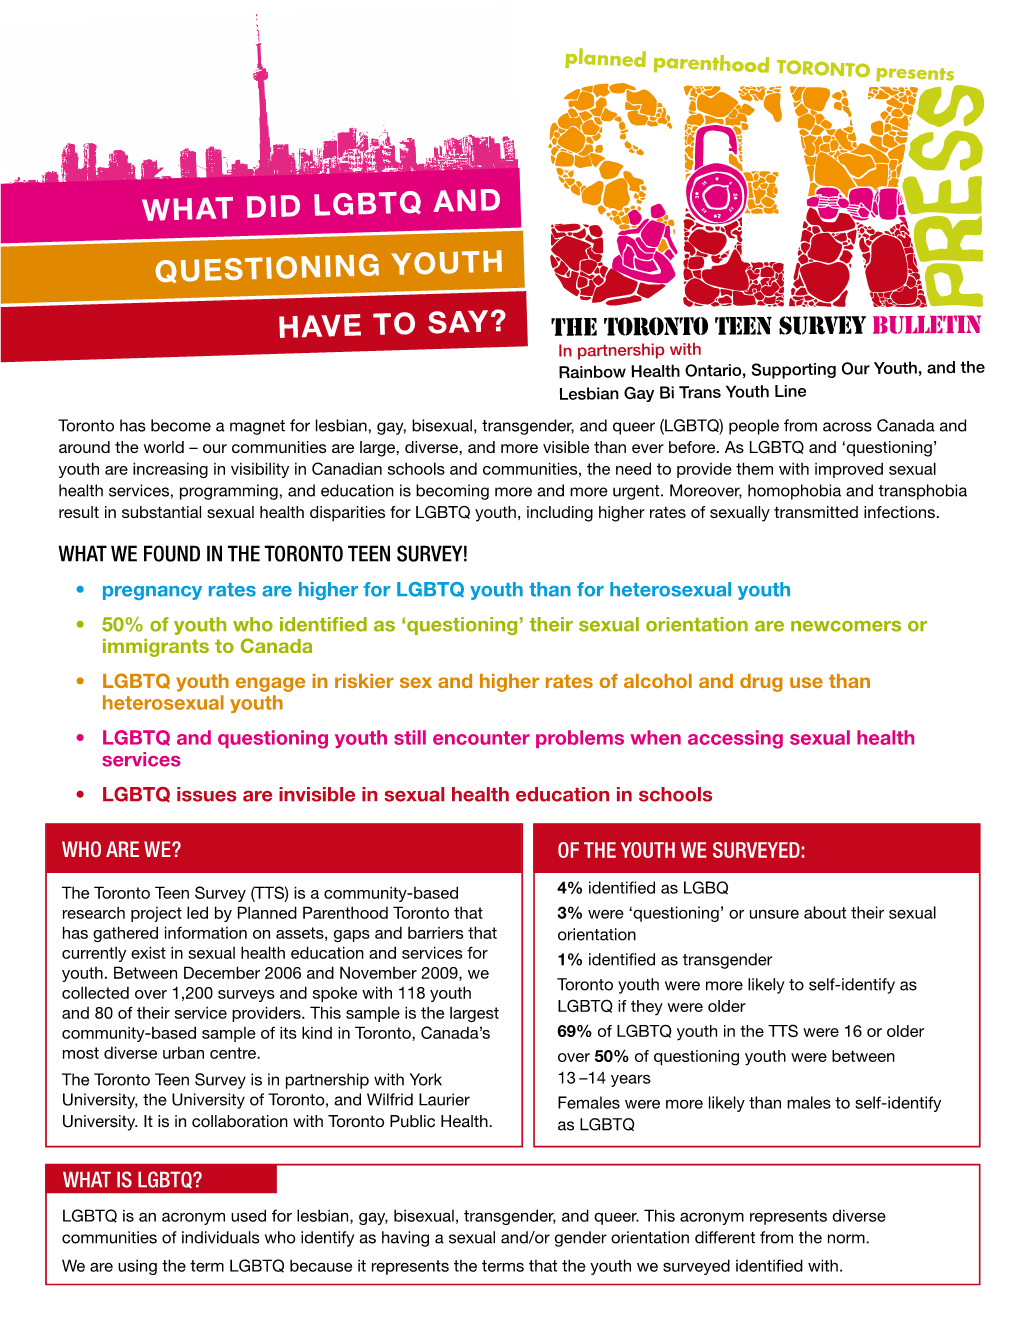 LGBTQ Youth, Including Higher Rates of Sexually Transmitted Infections